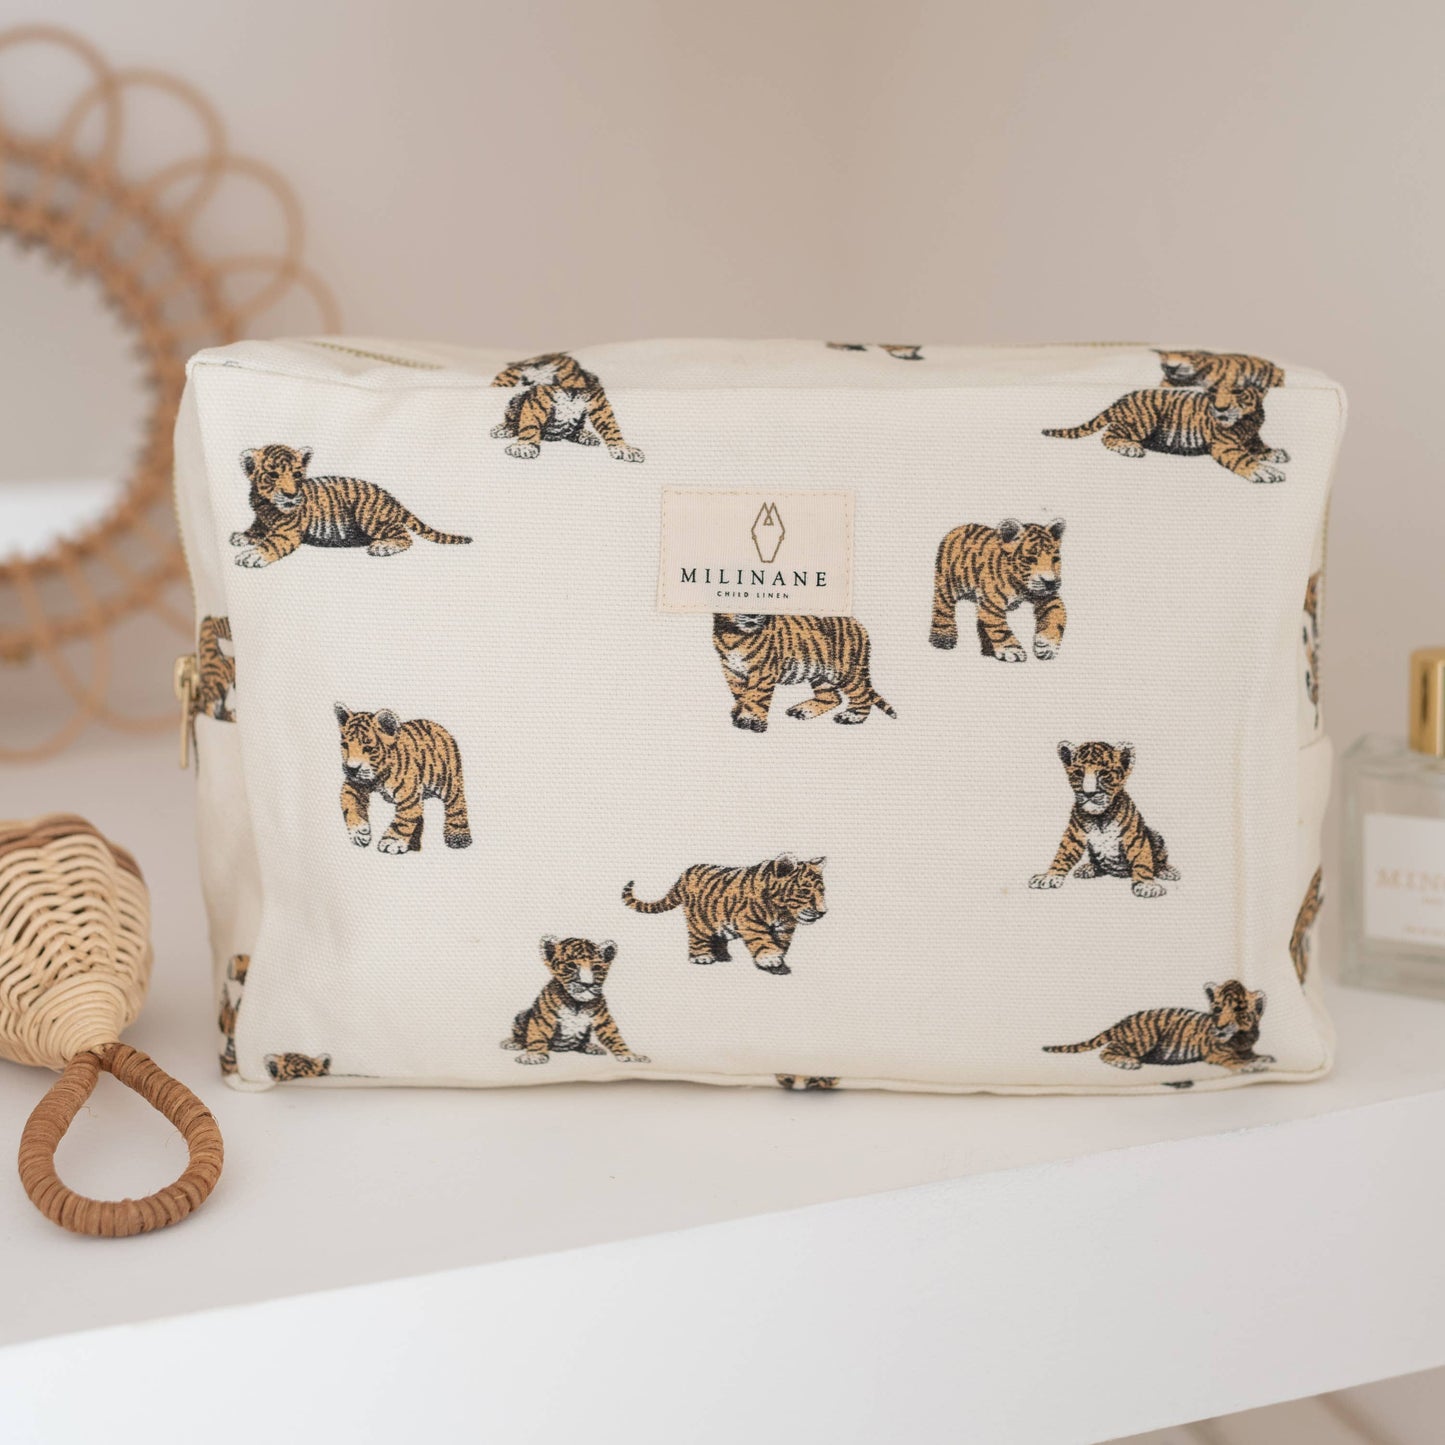 Thelma the Tiger - large vanity case